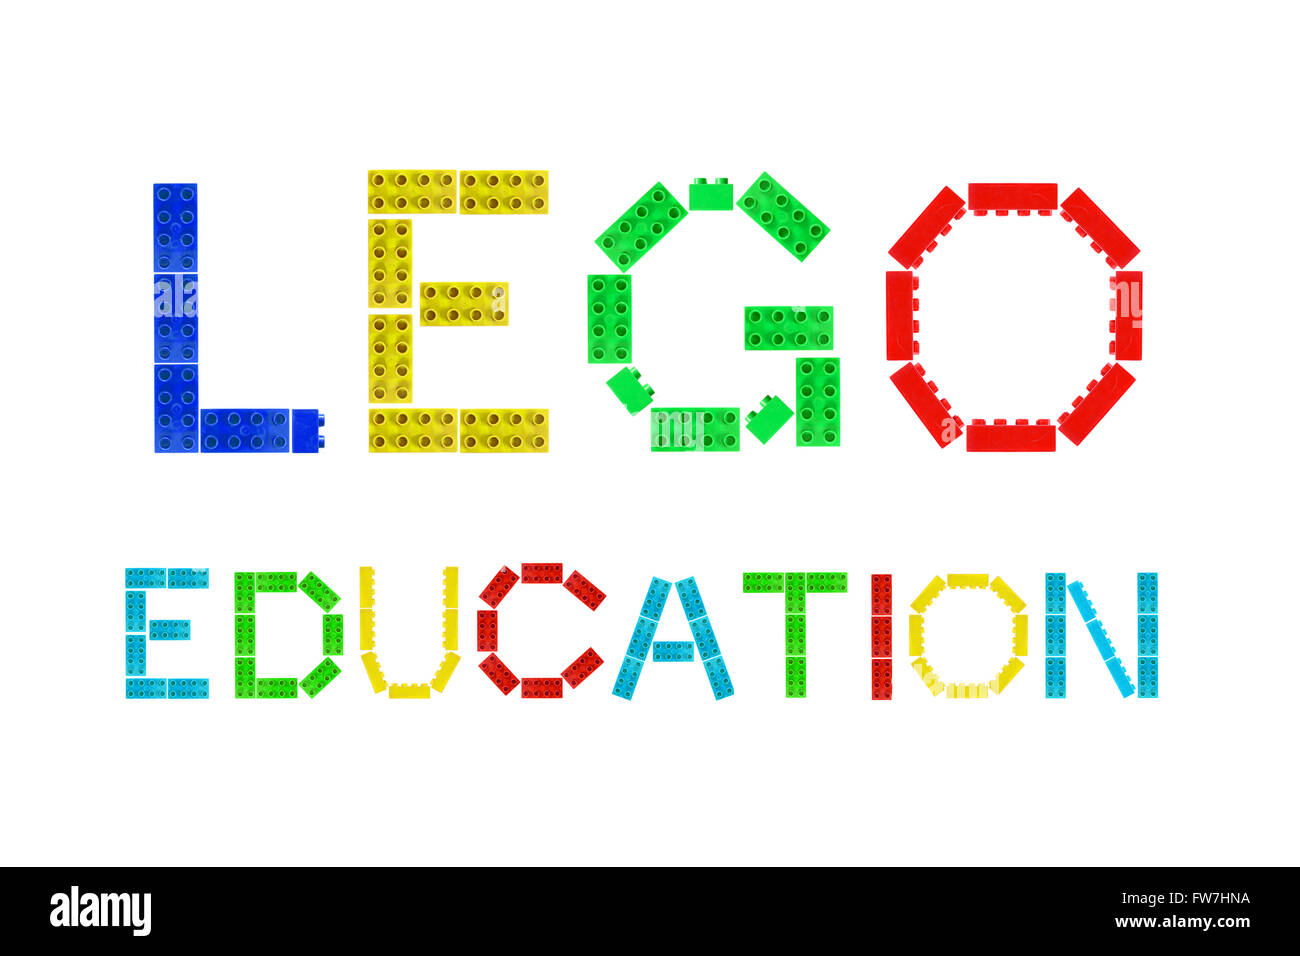 Lego education photography and images -